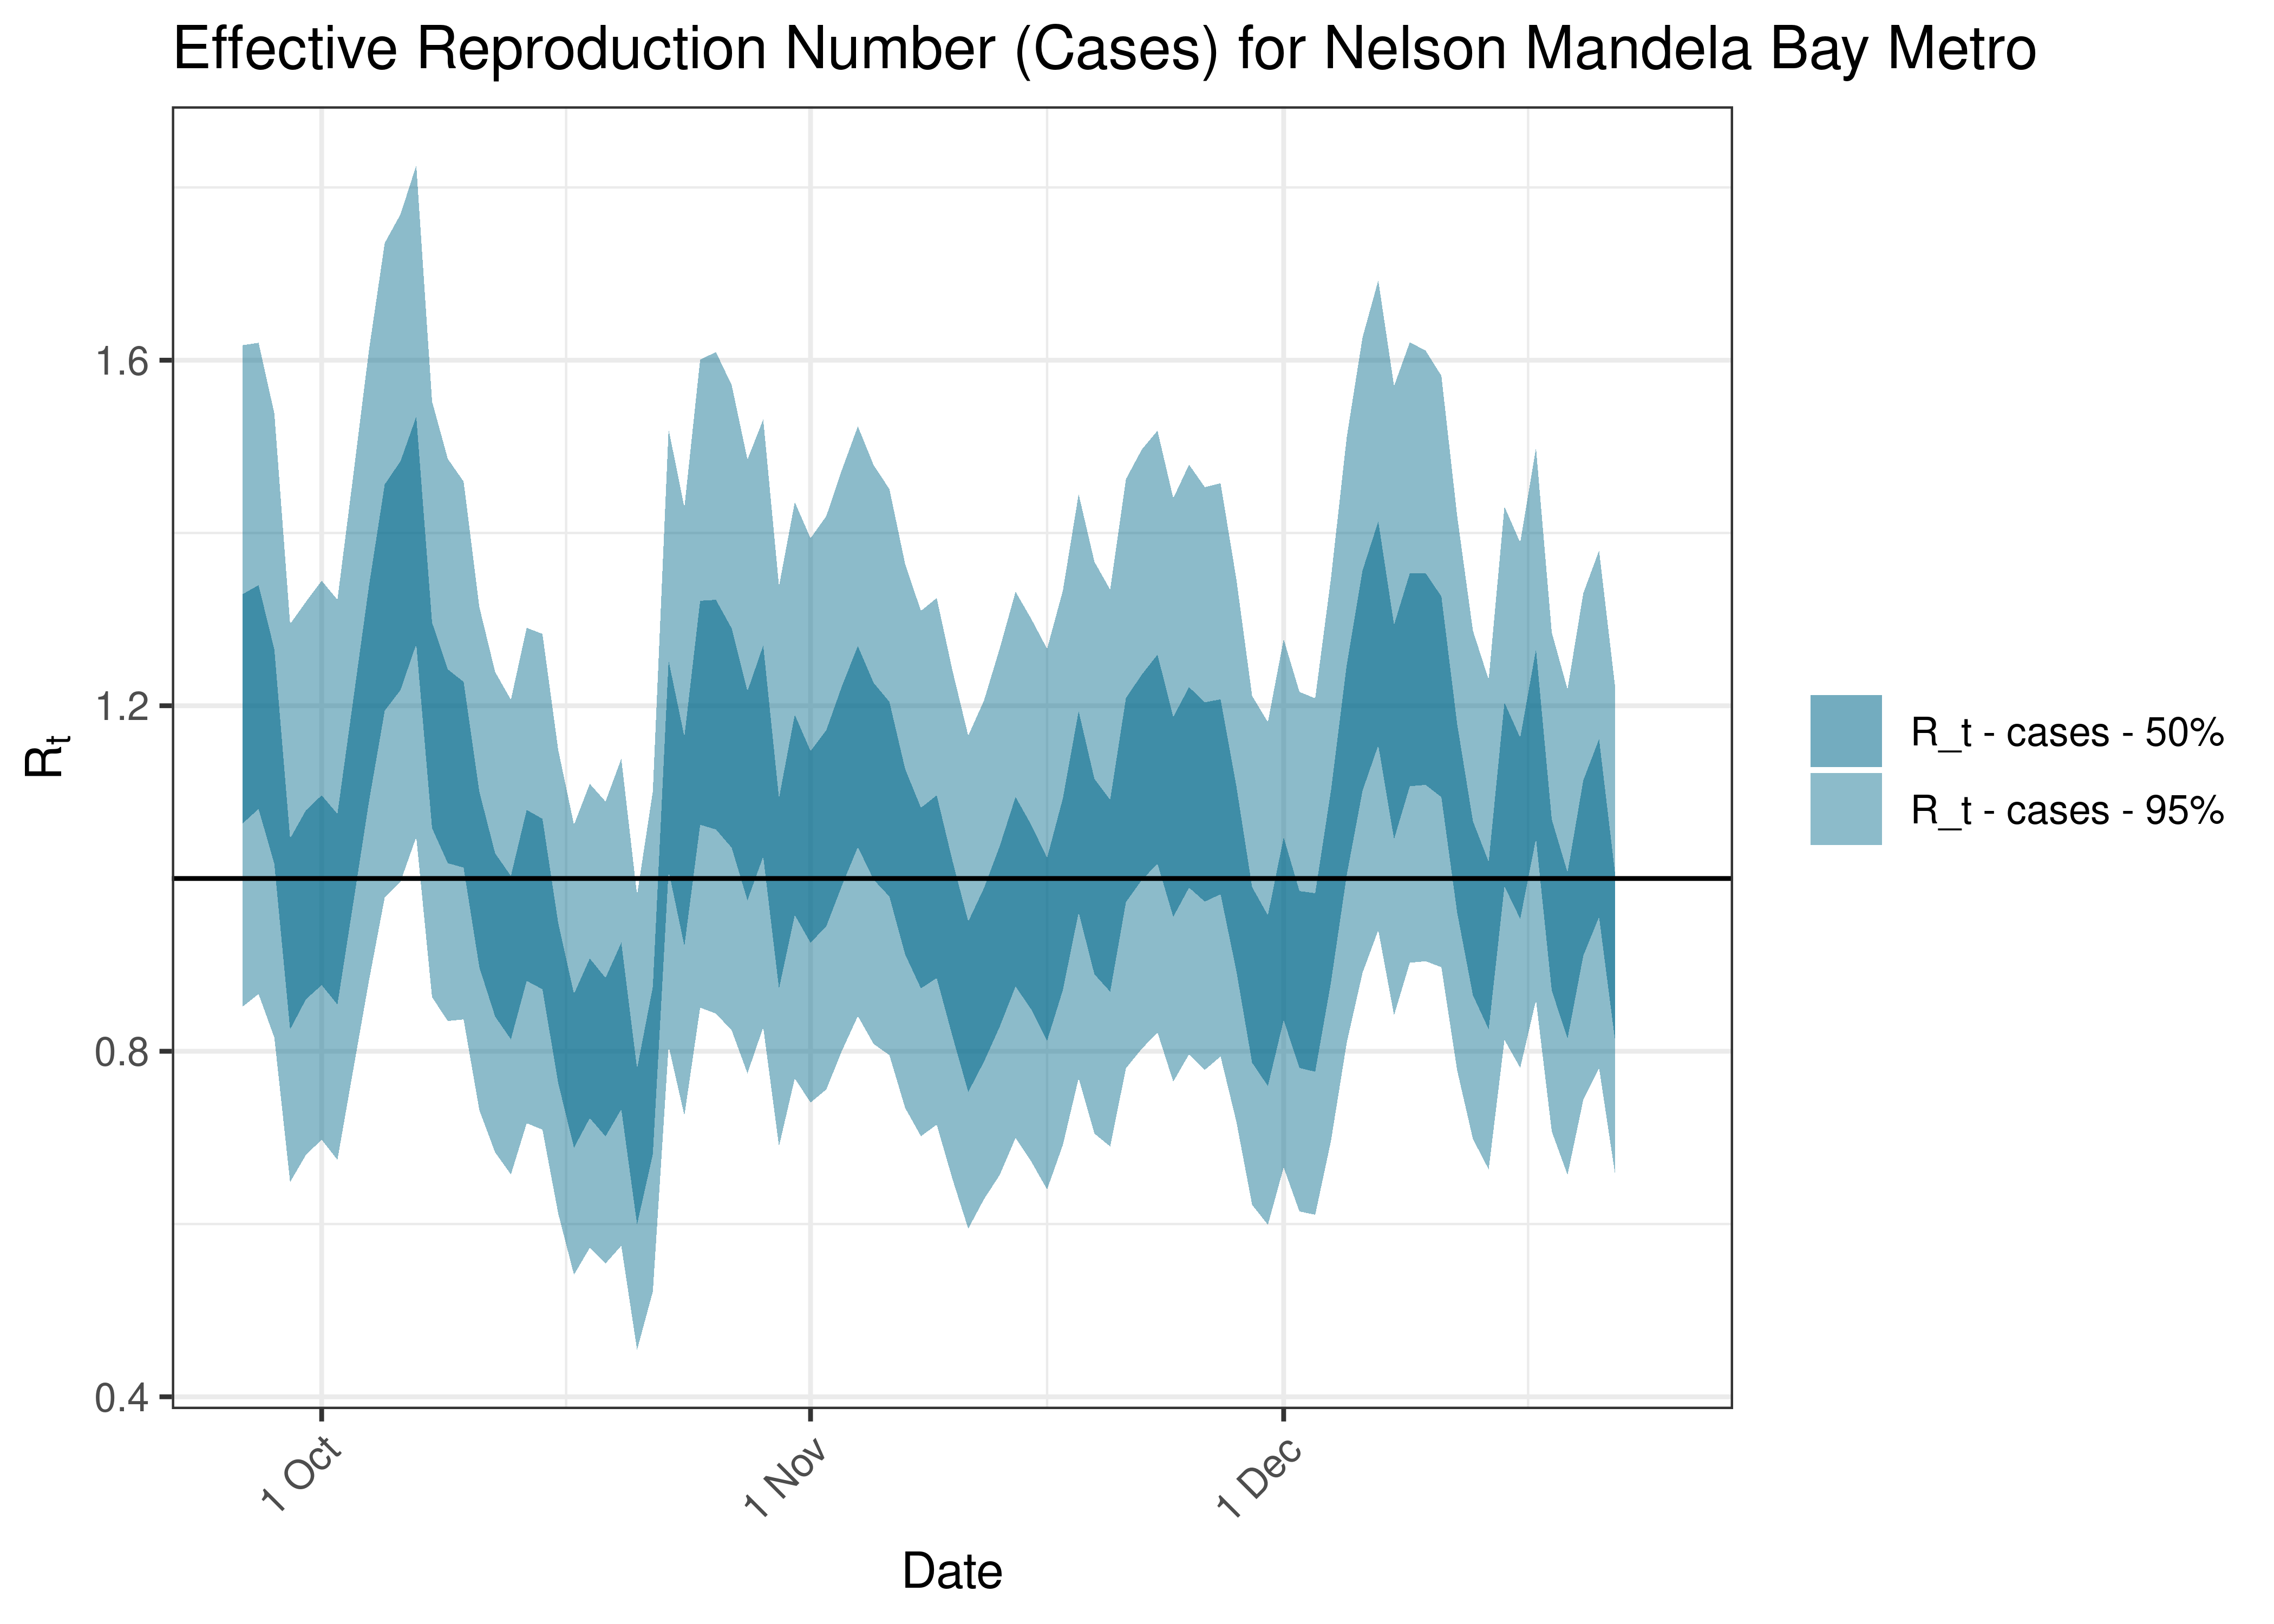 Estimated Effective Reproduction Number Based on Cases for Nelson Mandela Bay Metro over last 90 days